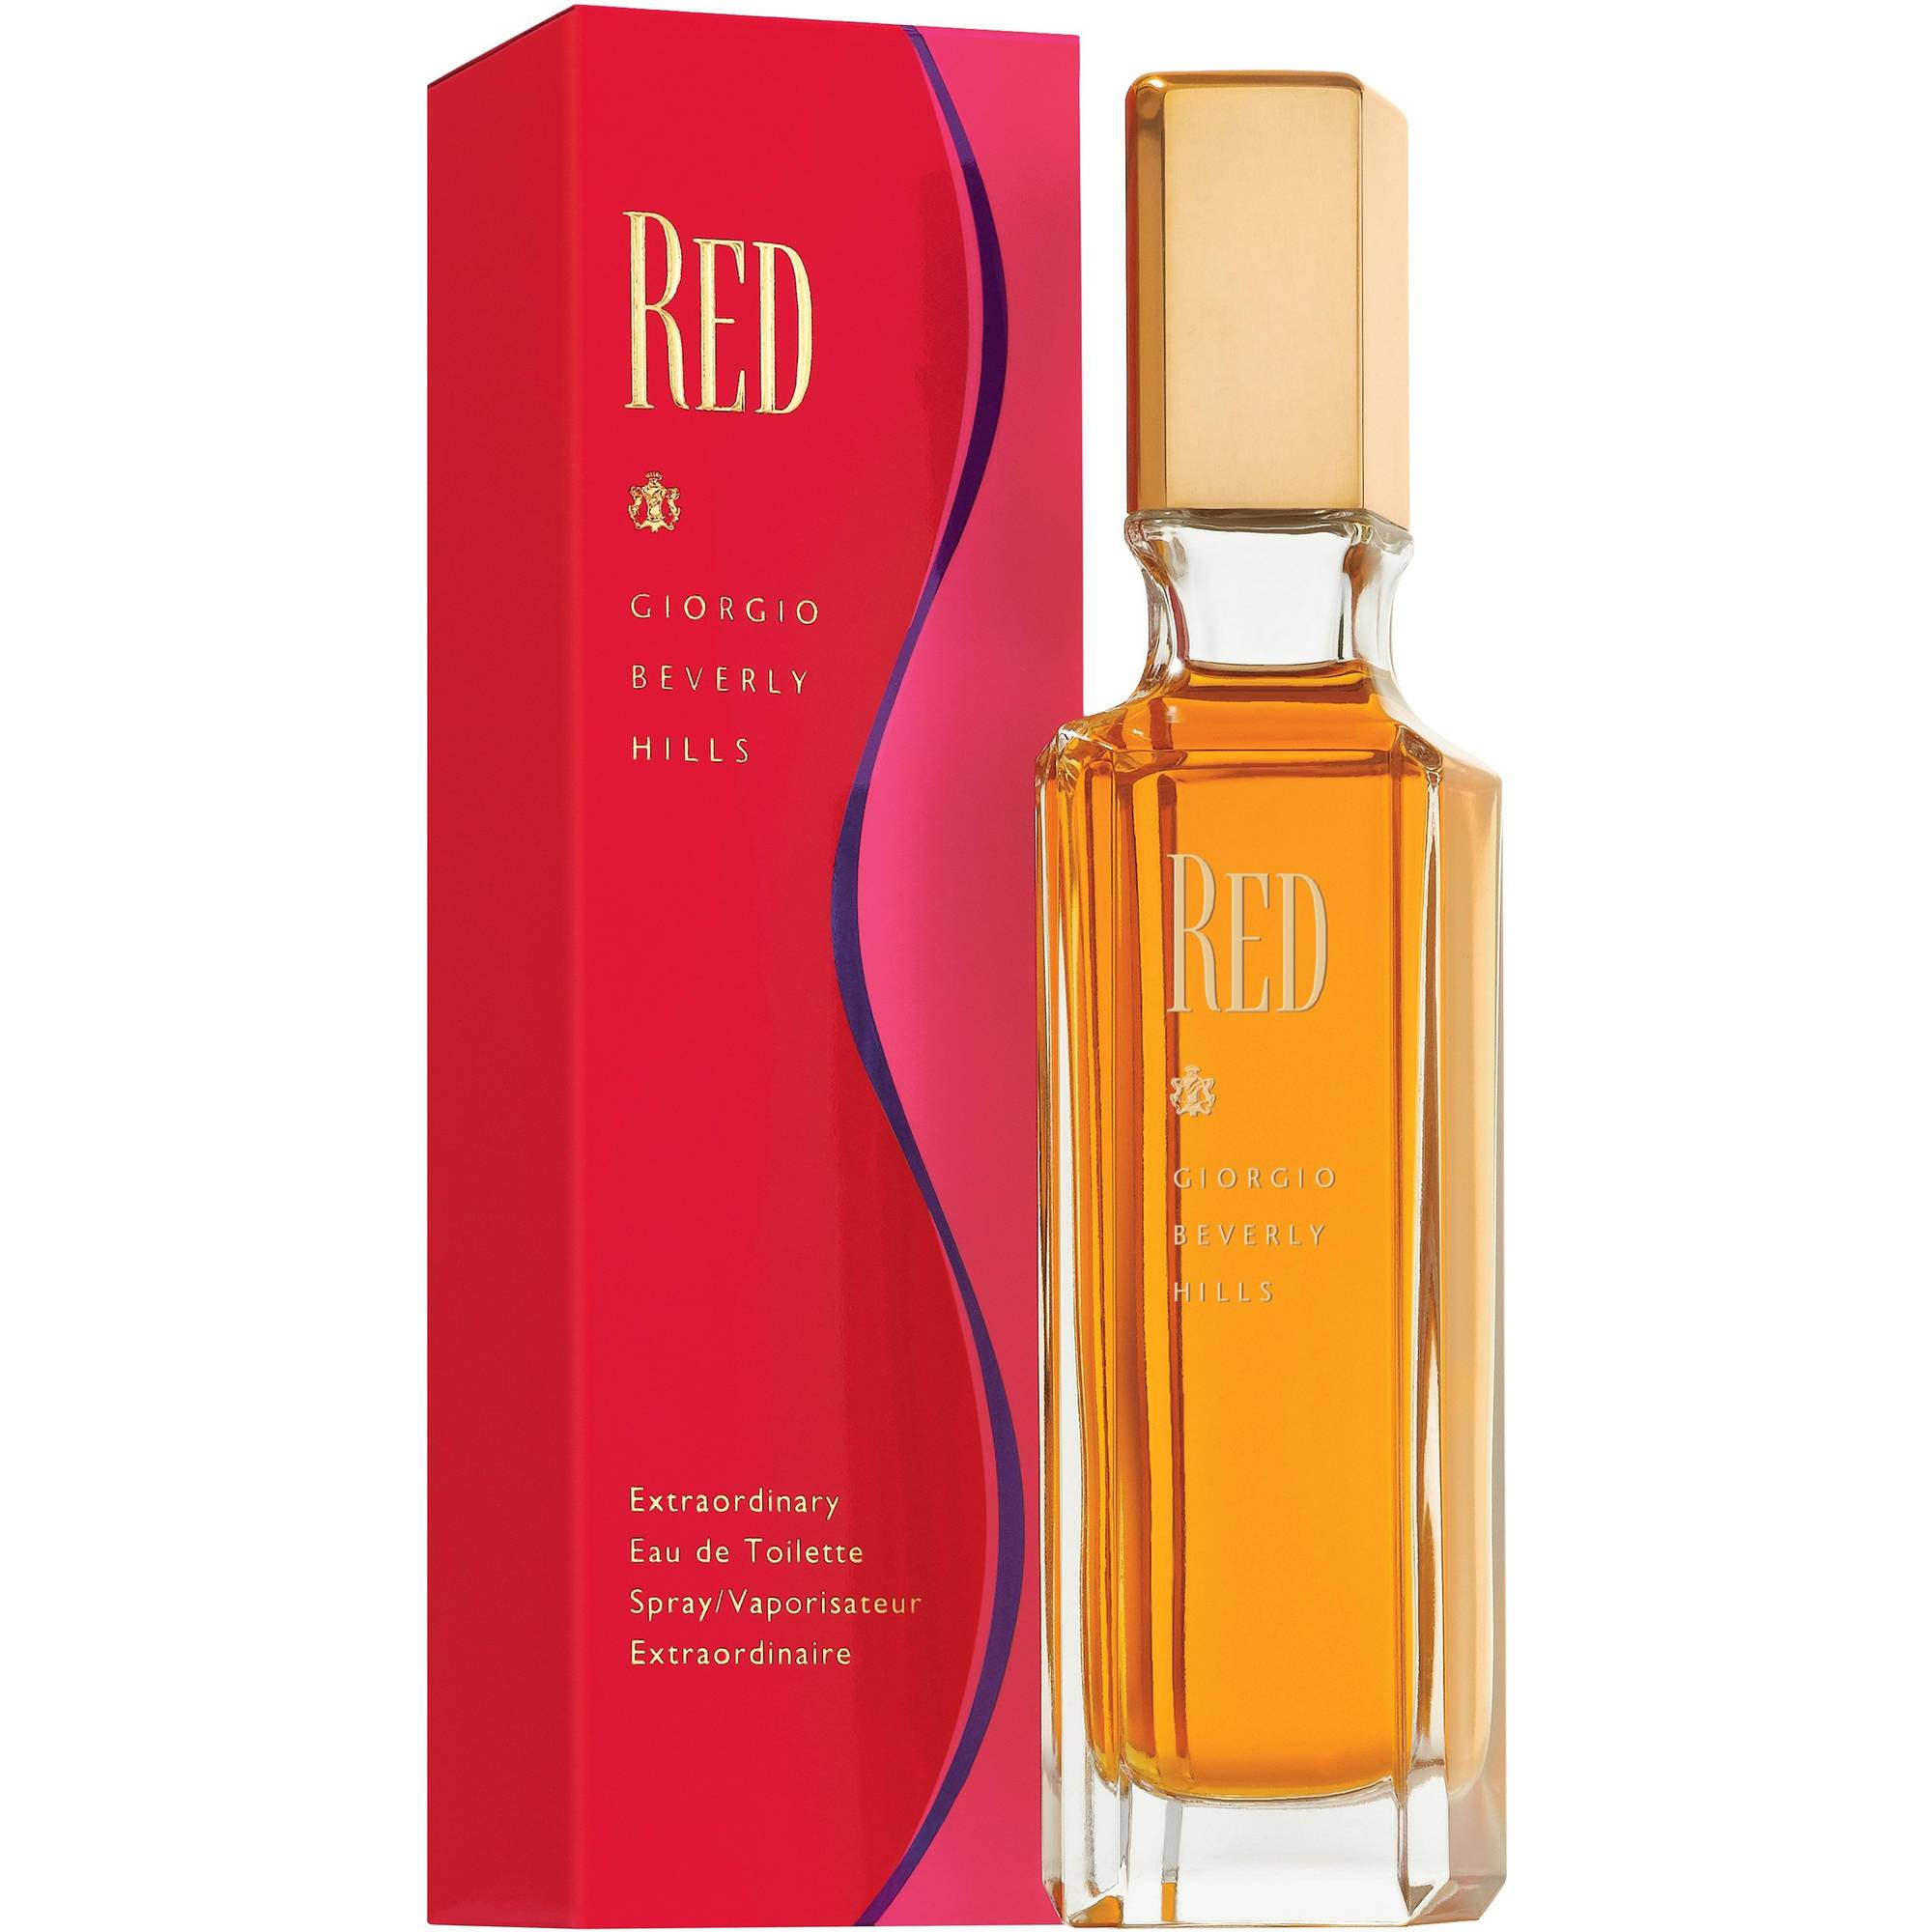 Introduced in 1989, Red by Giorgio Beverly Hills is a spicy, confident, casual scent that provides you with the inspiration needed to conquer any task. The classic woman's fragrance blends notes of juicy fruits and fresh flowers, combined with the low tones of sandalwood, musk and oakmoss. Spritz a touch of Red on your wrists and at the bend of your elbows for an oriental aroma that will turn heads all day. The scent lasts without being overpowering.